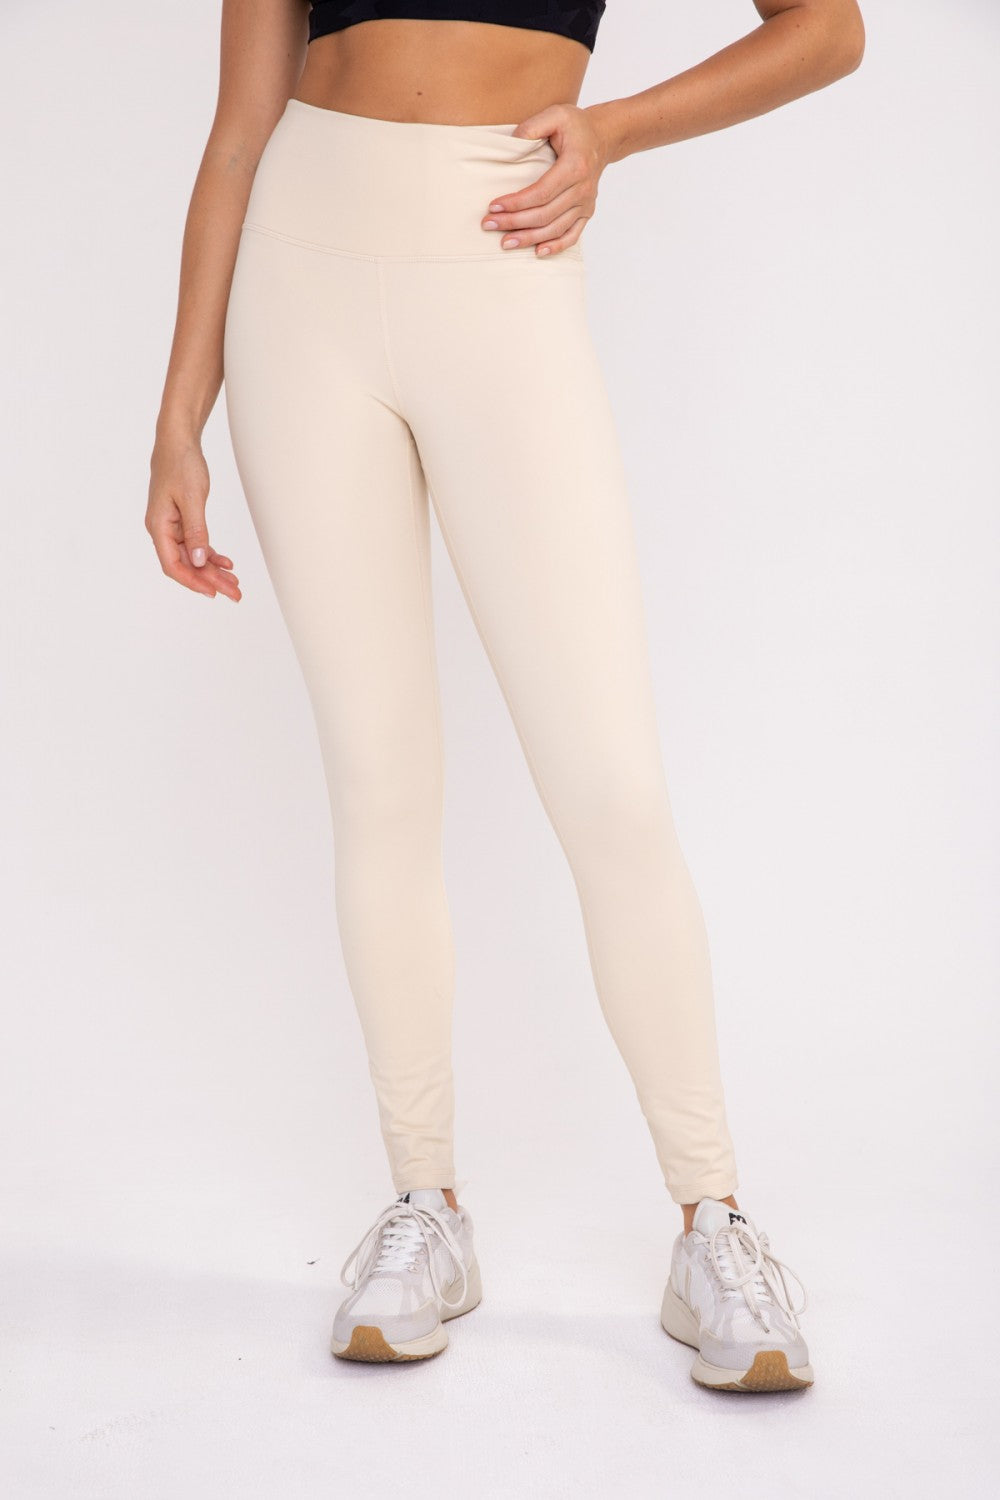 Essential Solid Leggings - APH-A0853 – The Sports Center